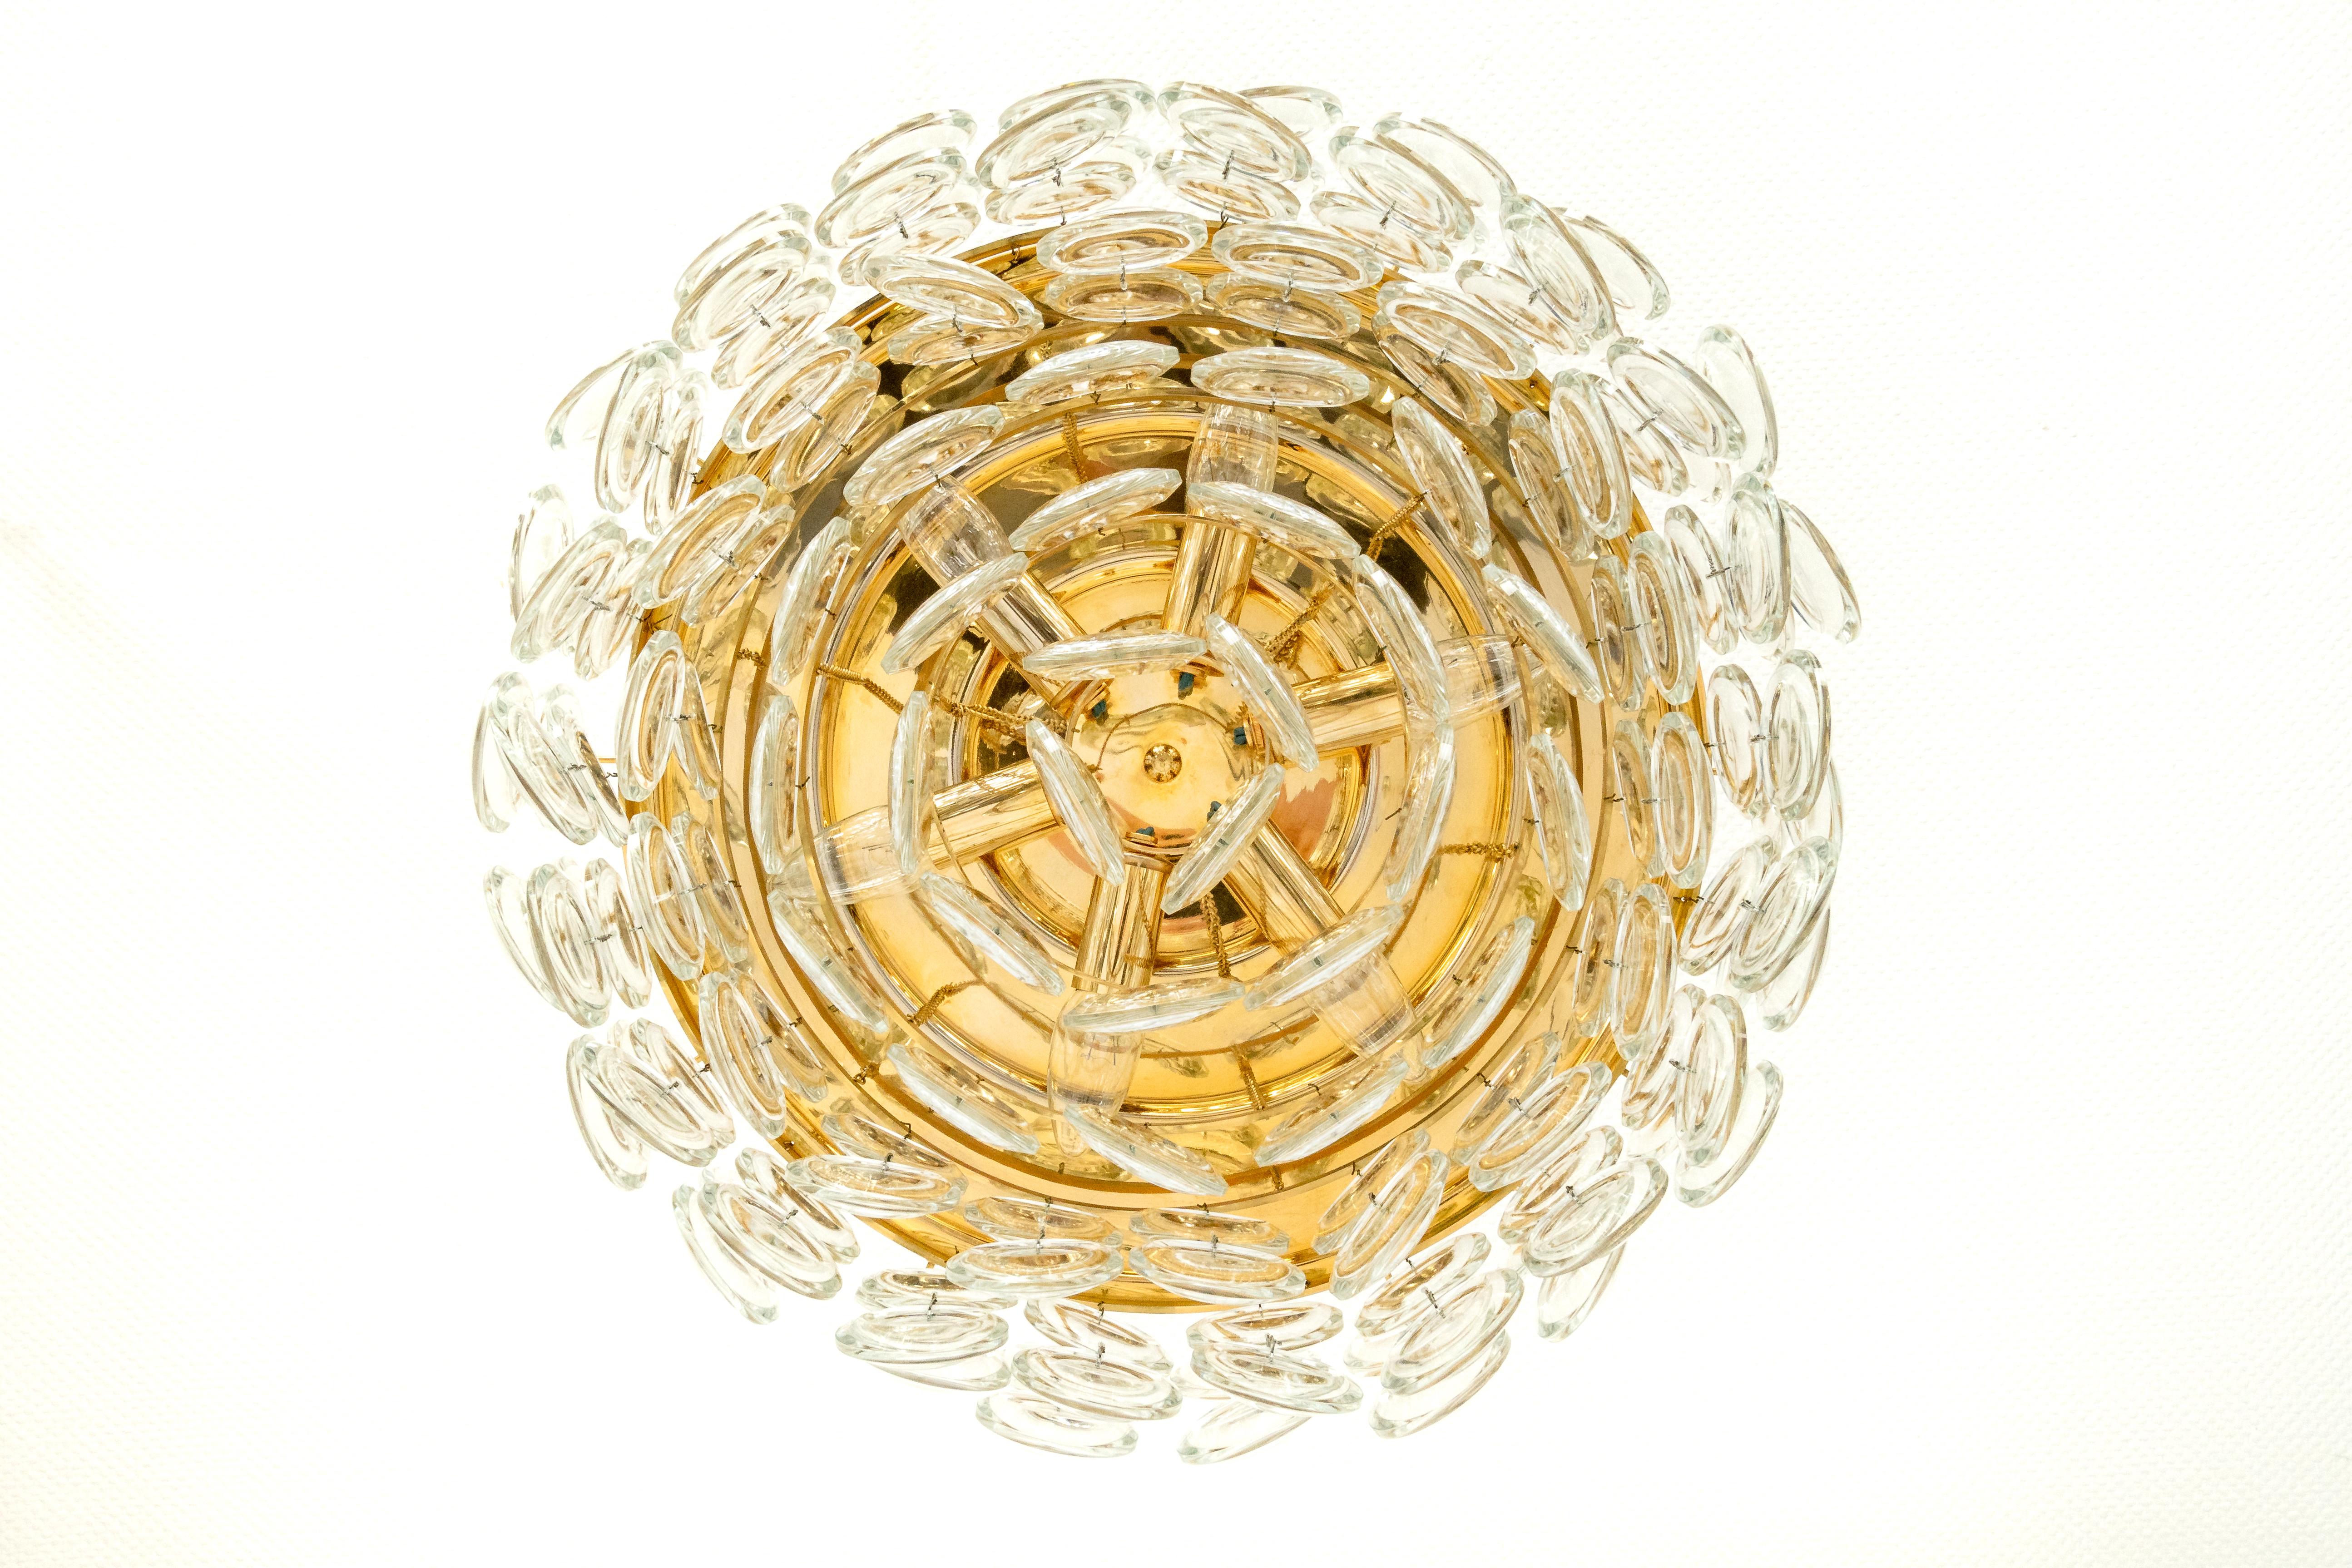 Delicate floral chandelier with crystal glass and gilded brass parts made by Palwa, Sciolari Design Germany, 1970s. Featuring a multitude of crystal glasses.
Measures: Diameter 19.5